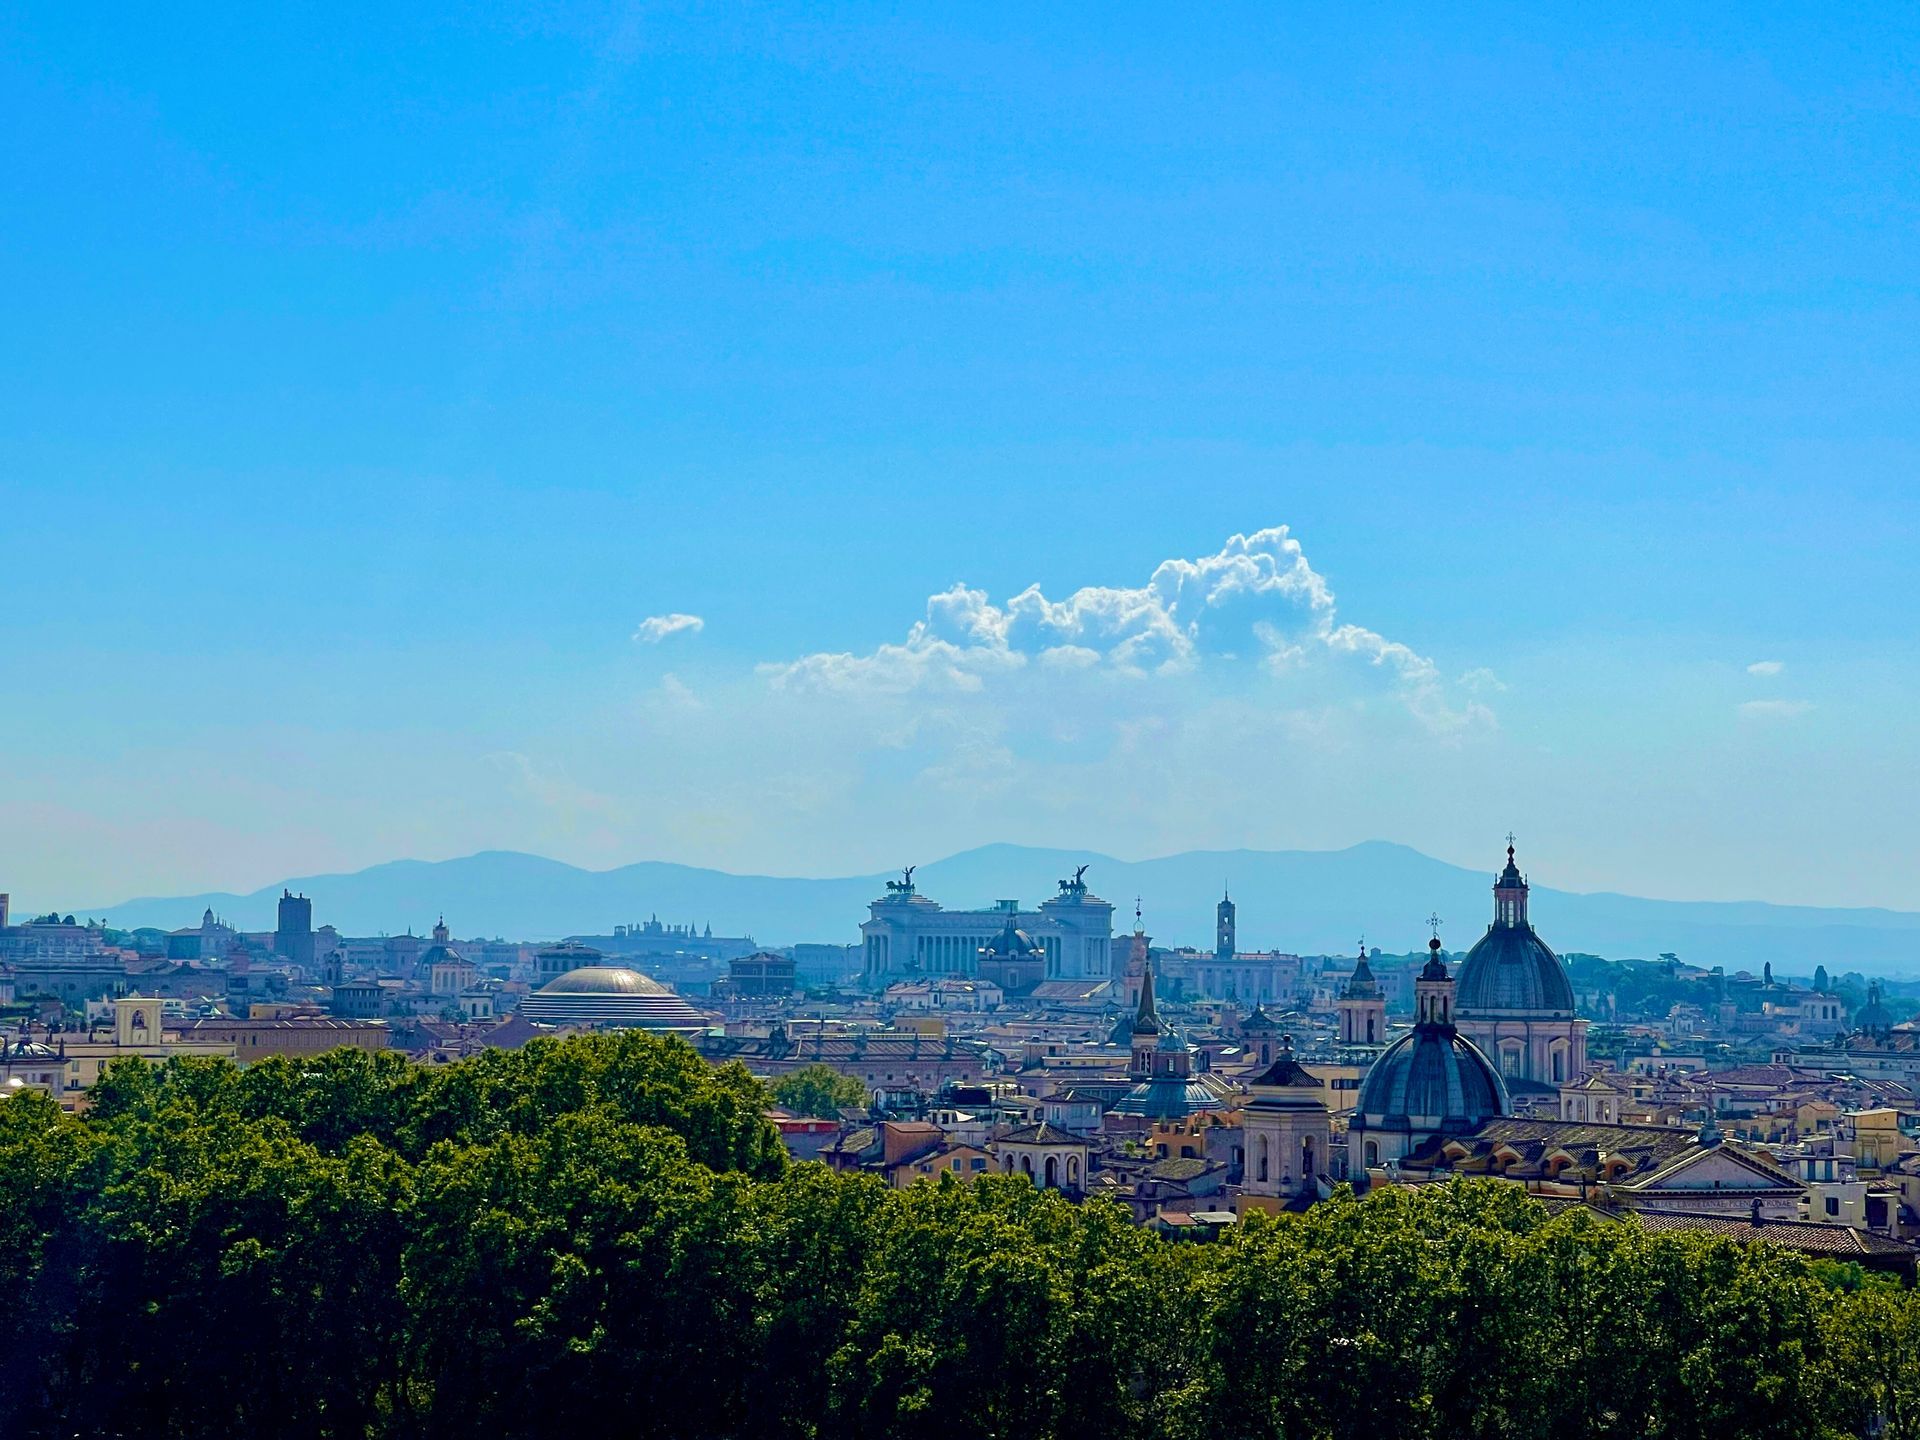 Castel Sant’Angelo Guided Tours and Tickets, including the best panoramas of Rome